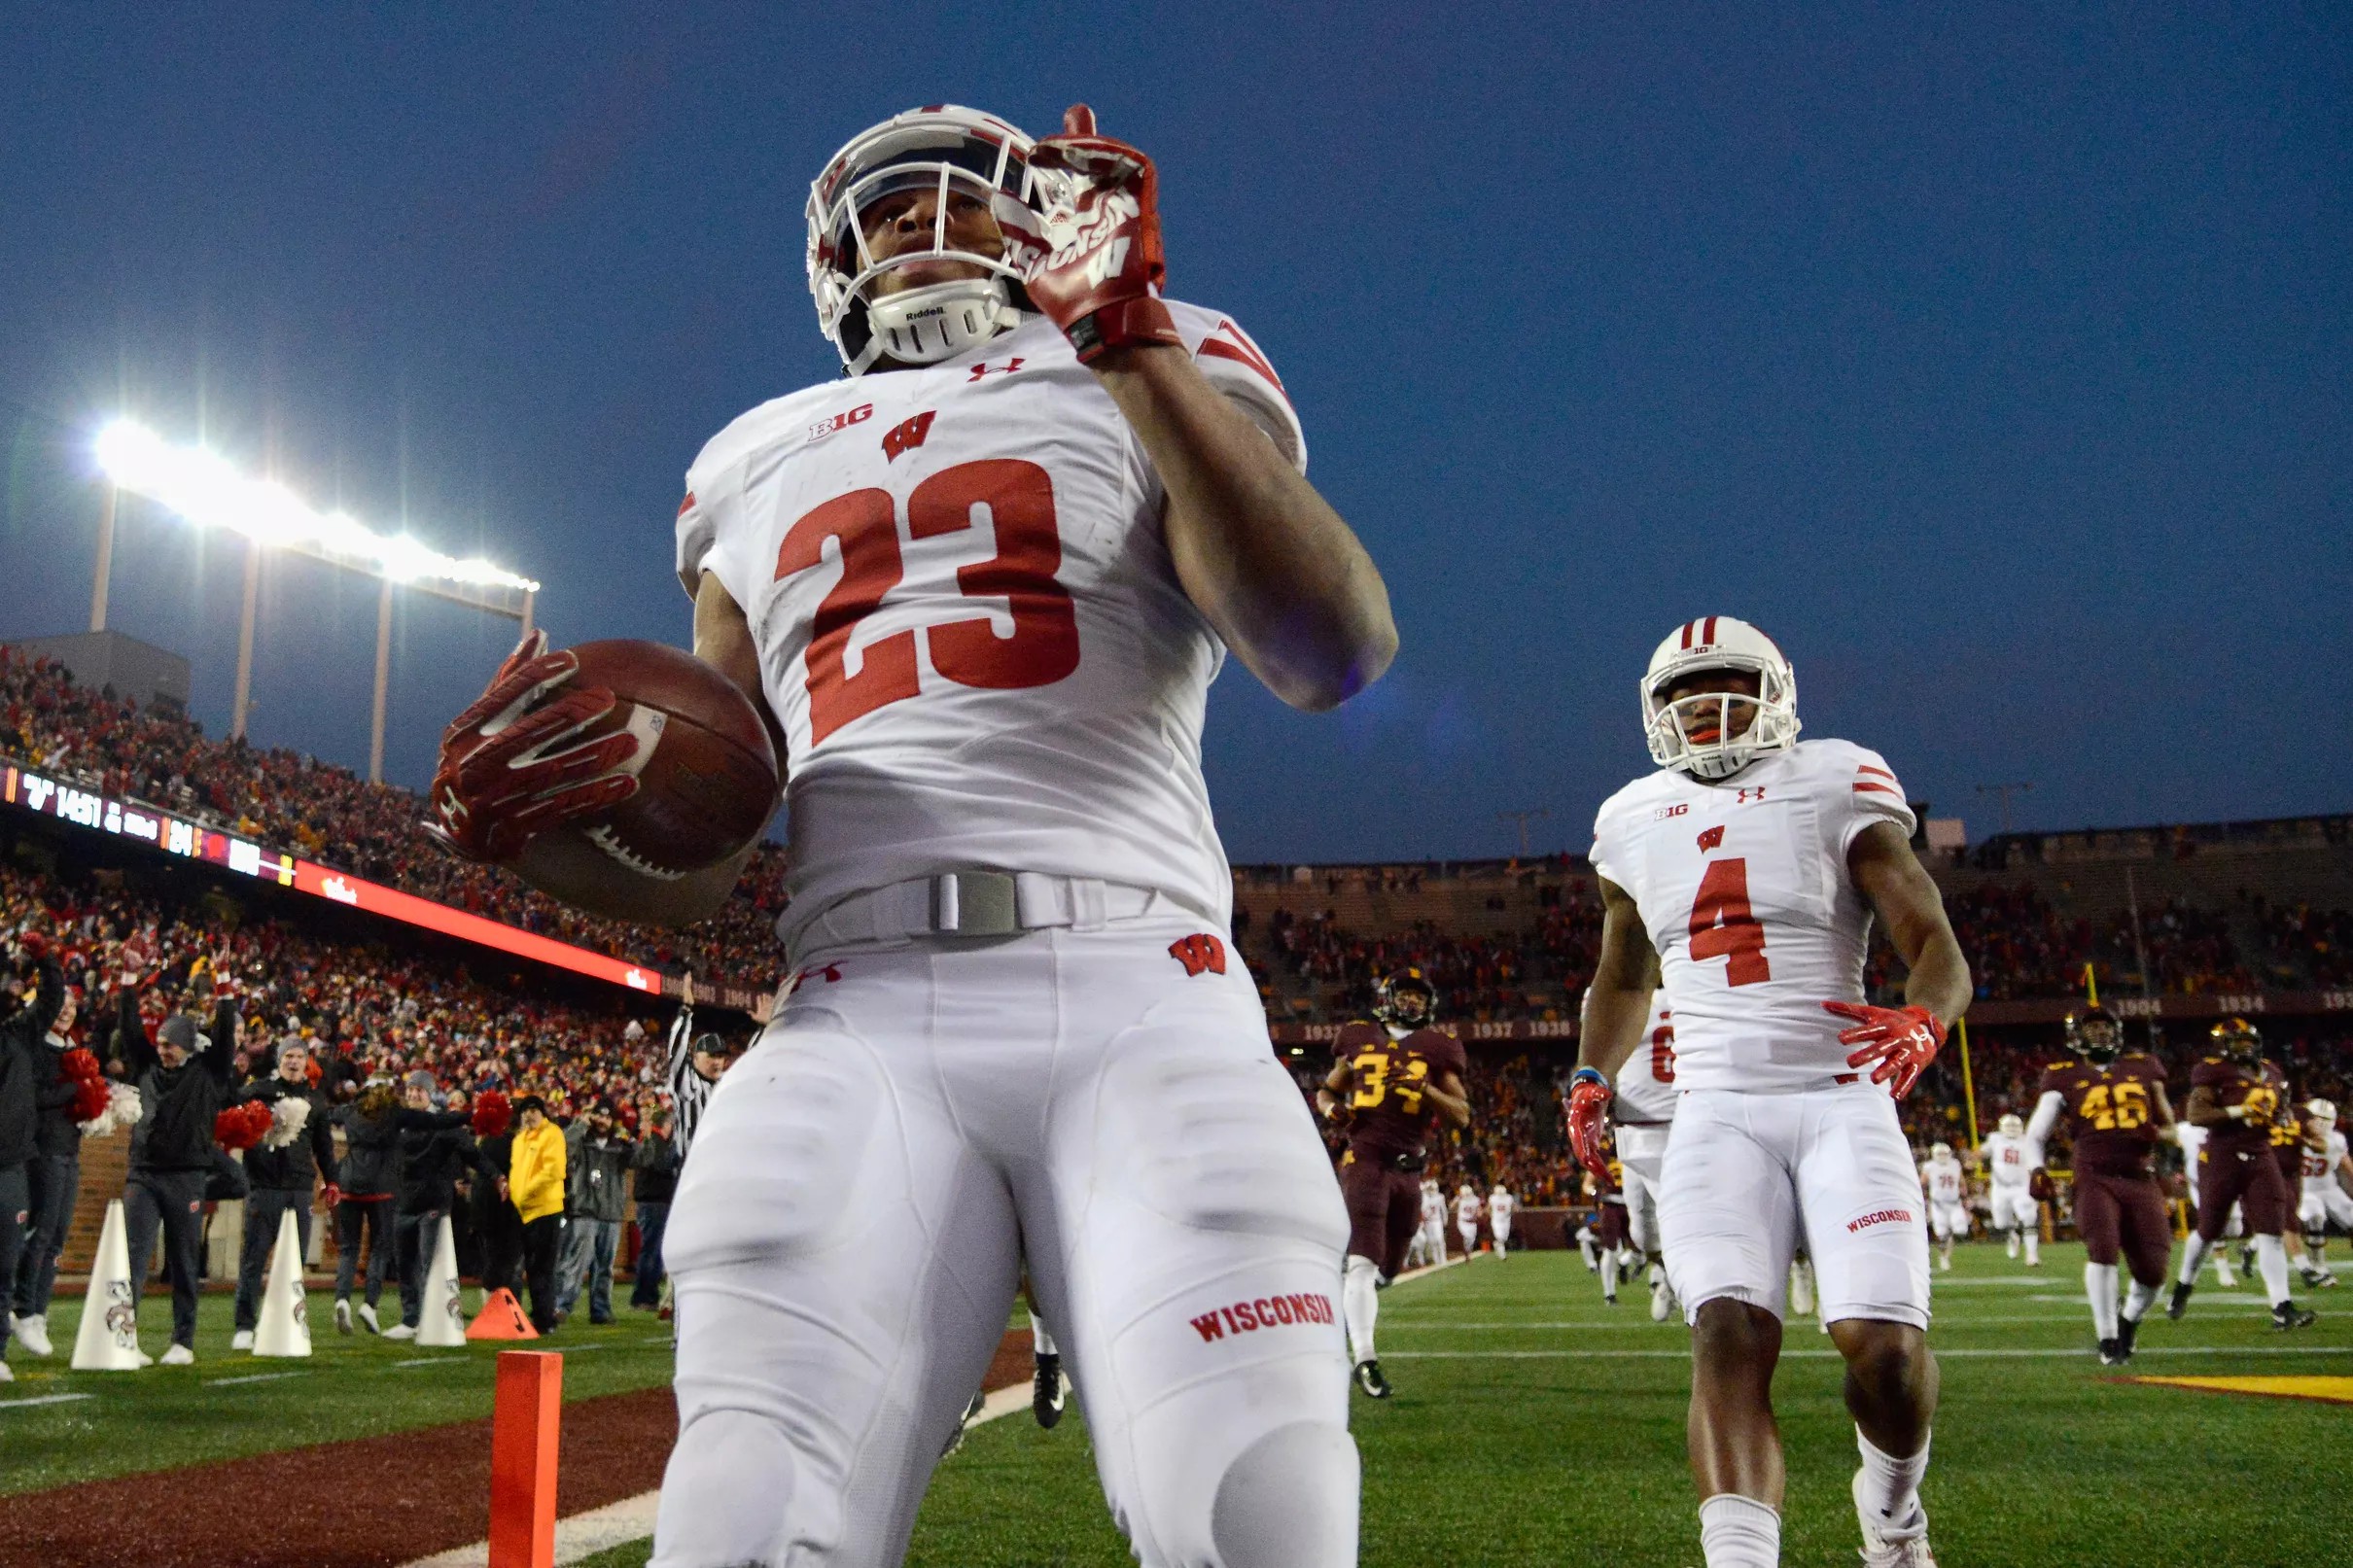 Big Ten Bowl Projections Where will the Wisconsin Badgers land?